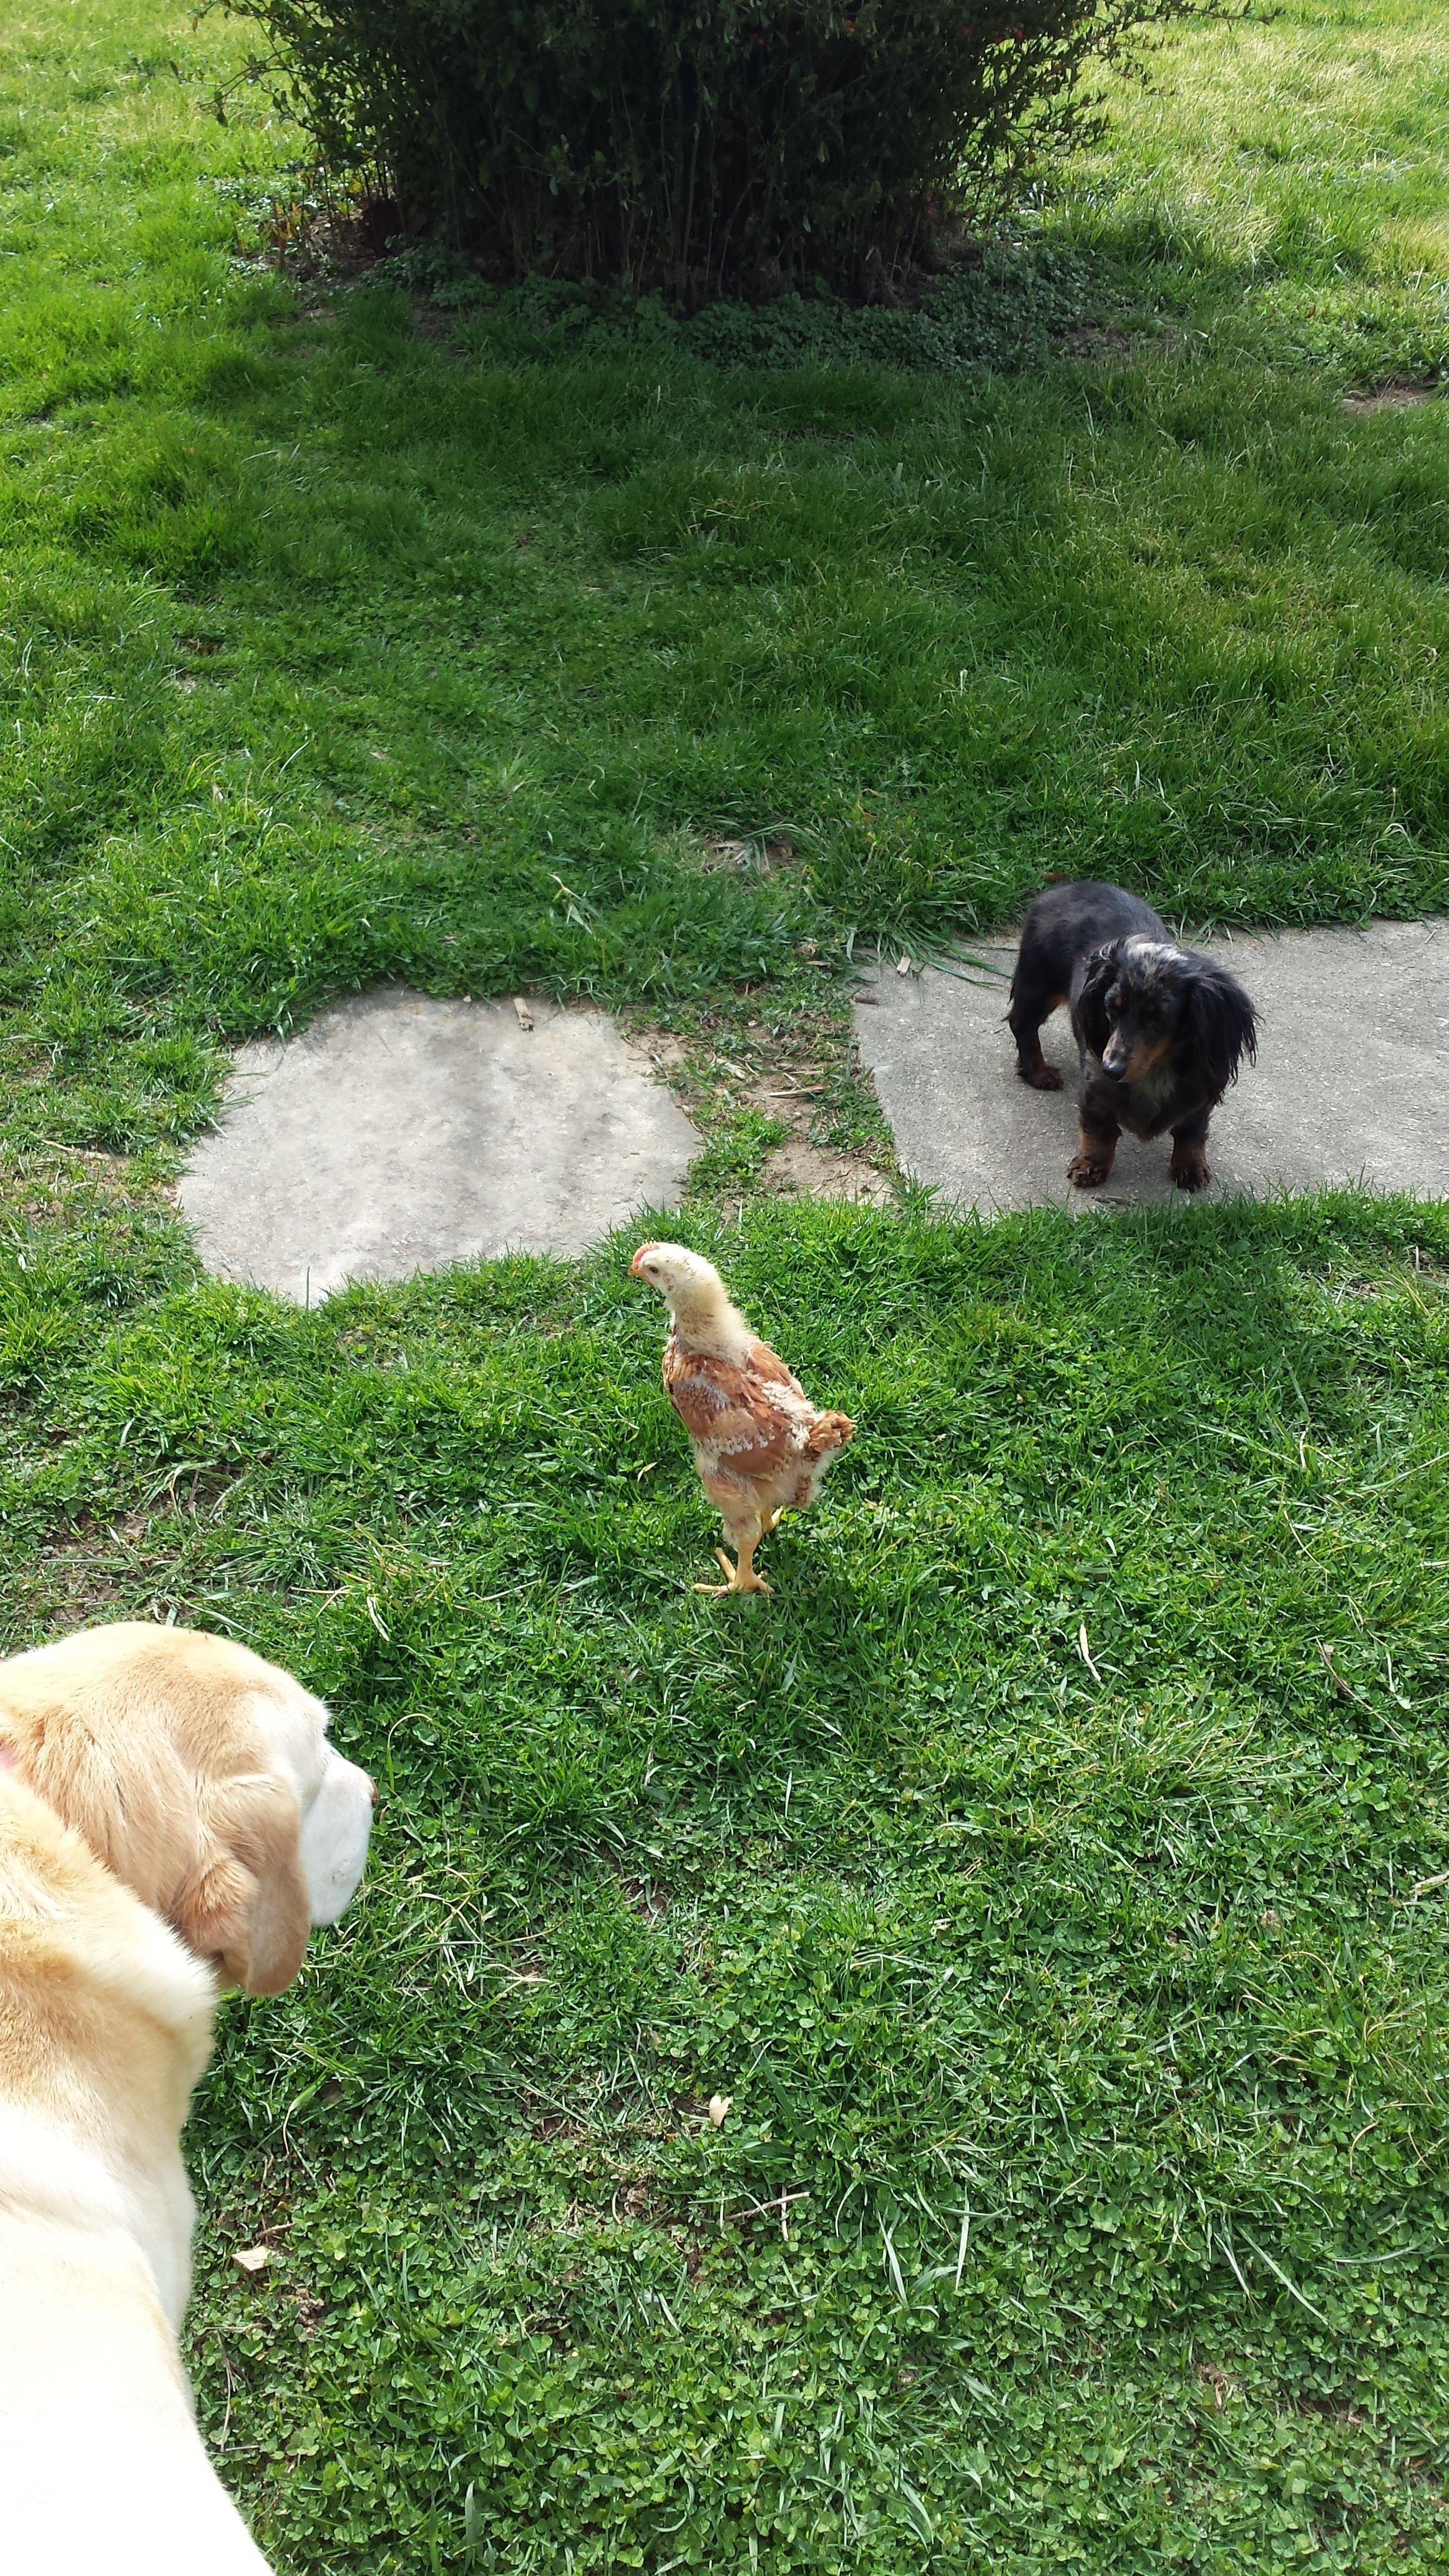 The other family members meeting their feathered sister, and vise versa :)